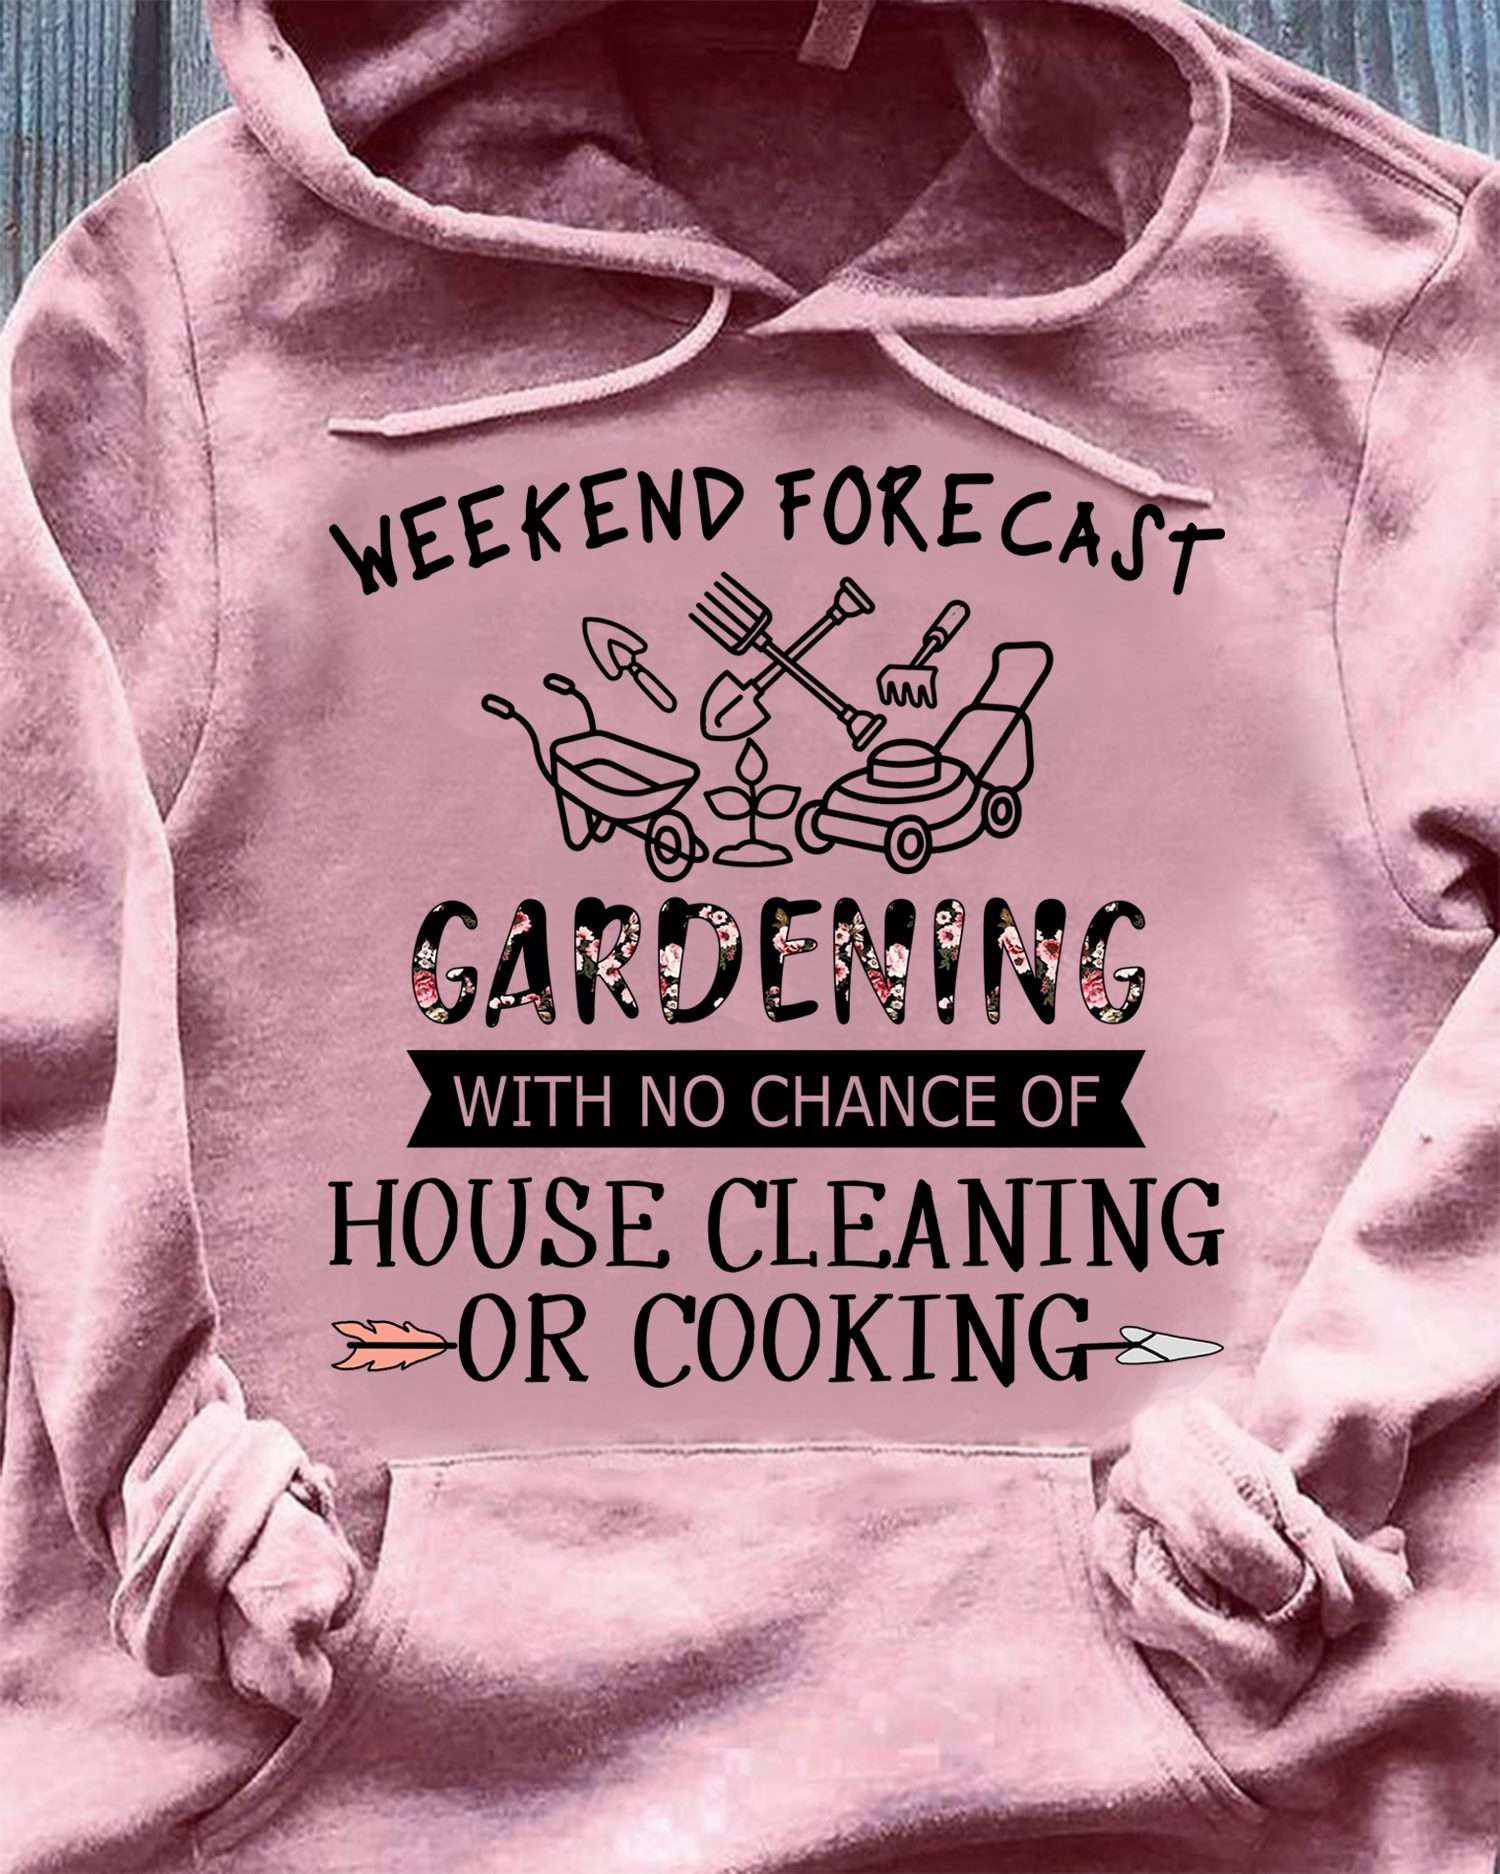 Weekend forecast gardening with no chance of house cleaning or cooking